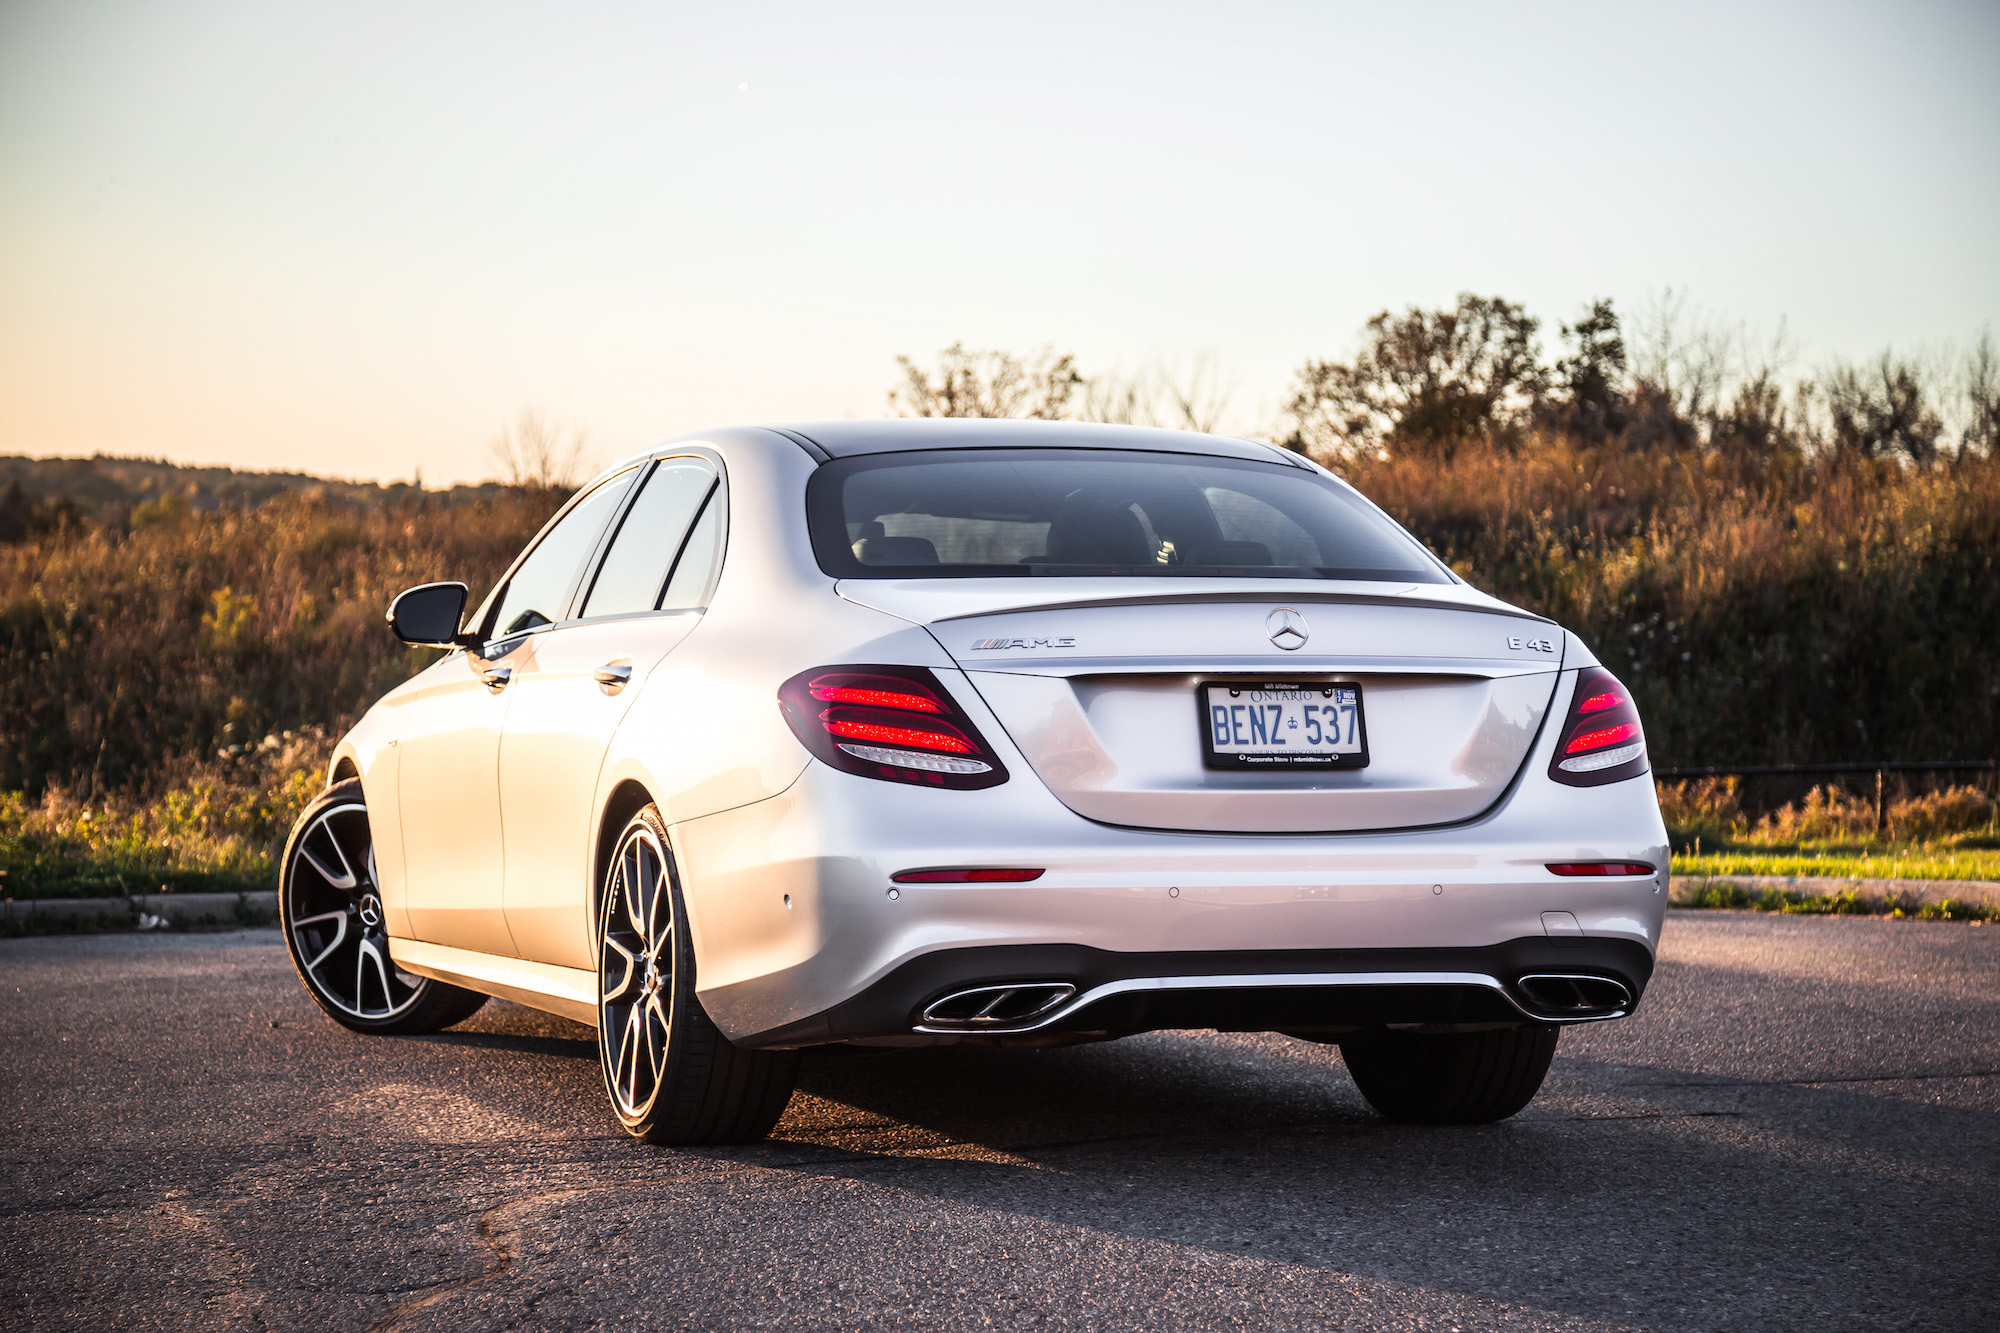 Review: 2017 Mercedes-AMG E 43 4MATIC Sedan | Canadian Auto Review